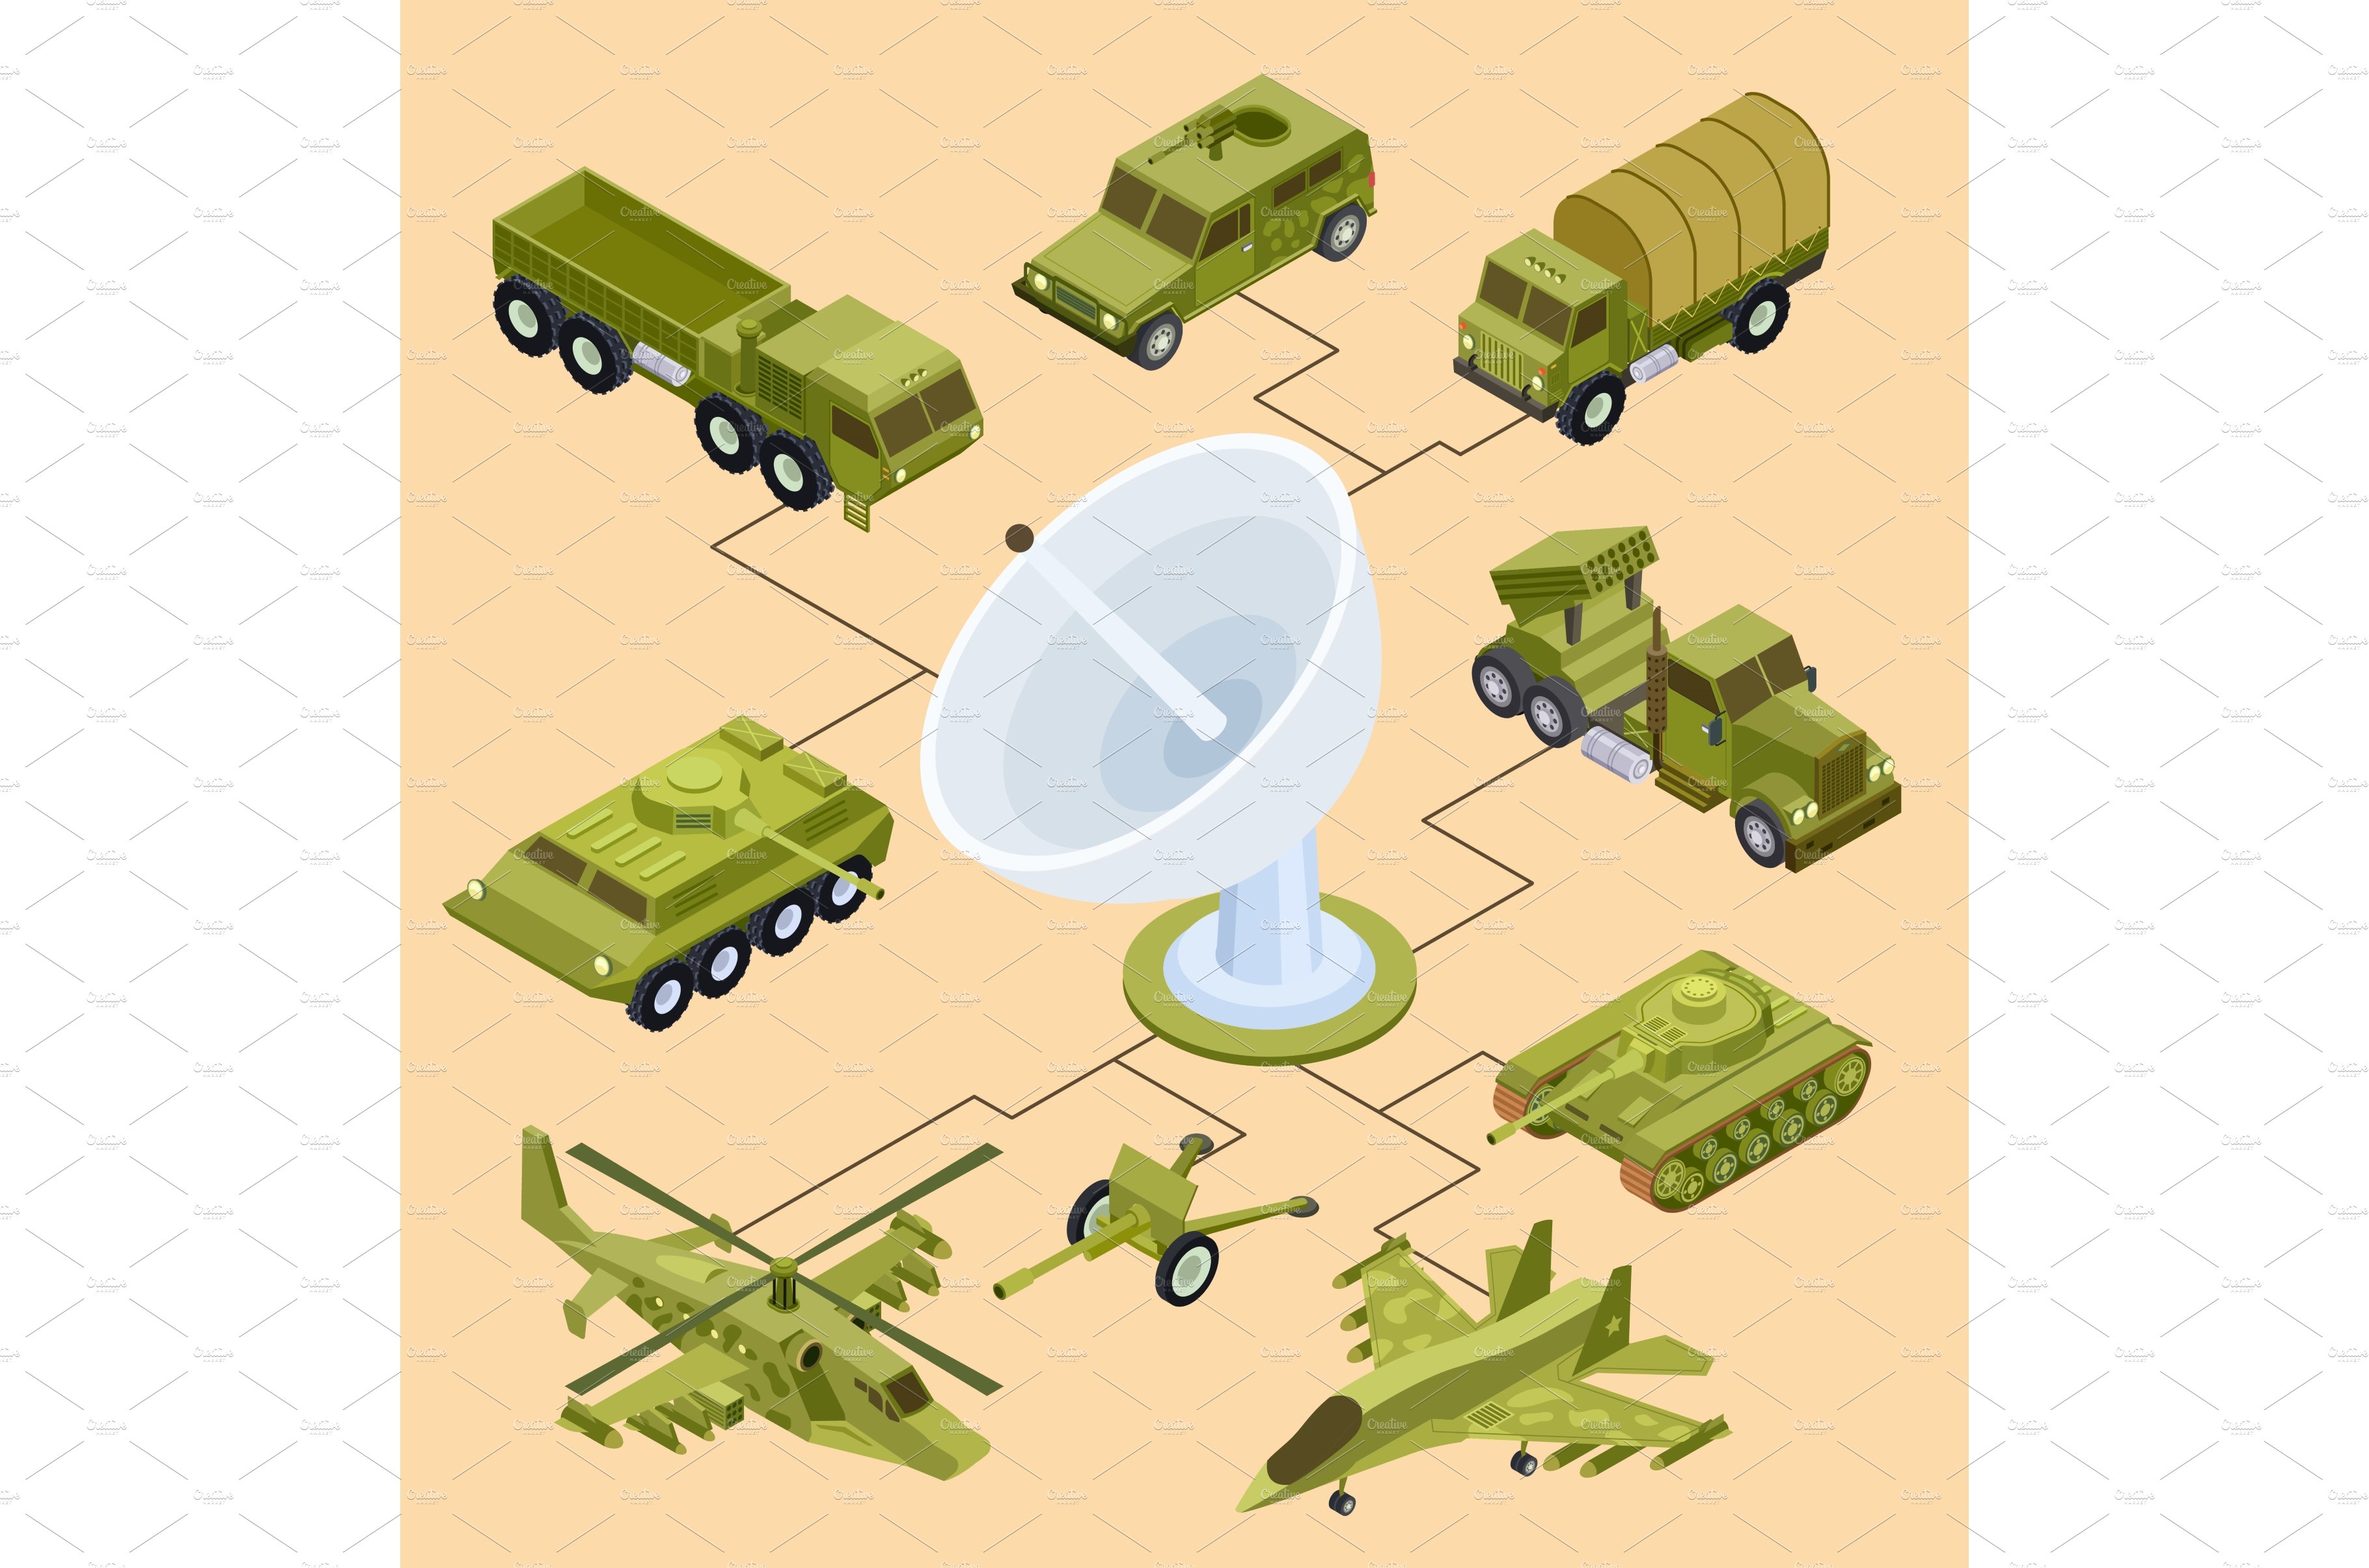 Remote control of military equipment cover image.